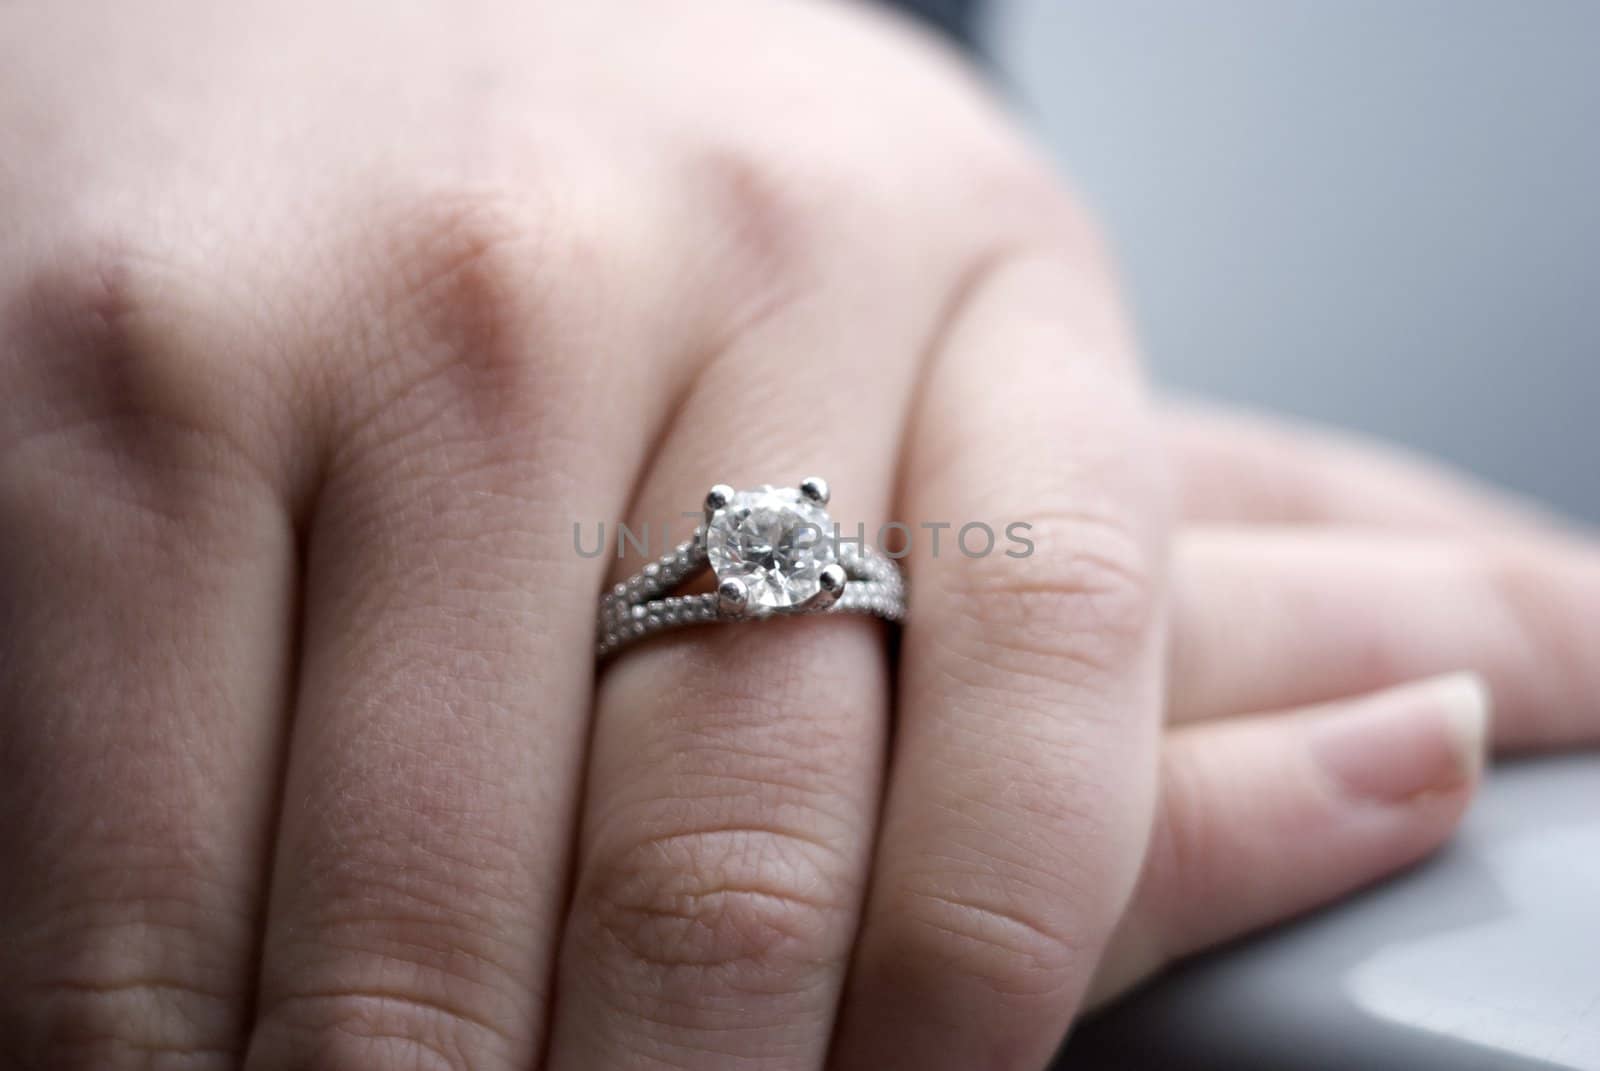 engagement ring by seattlephoto